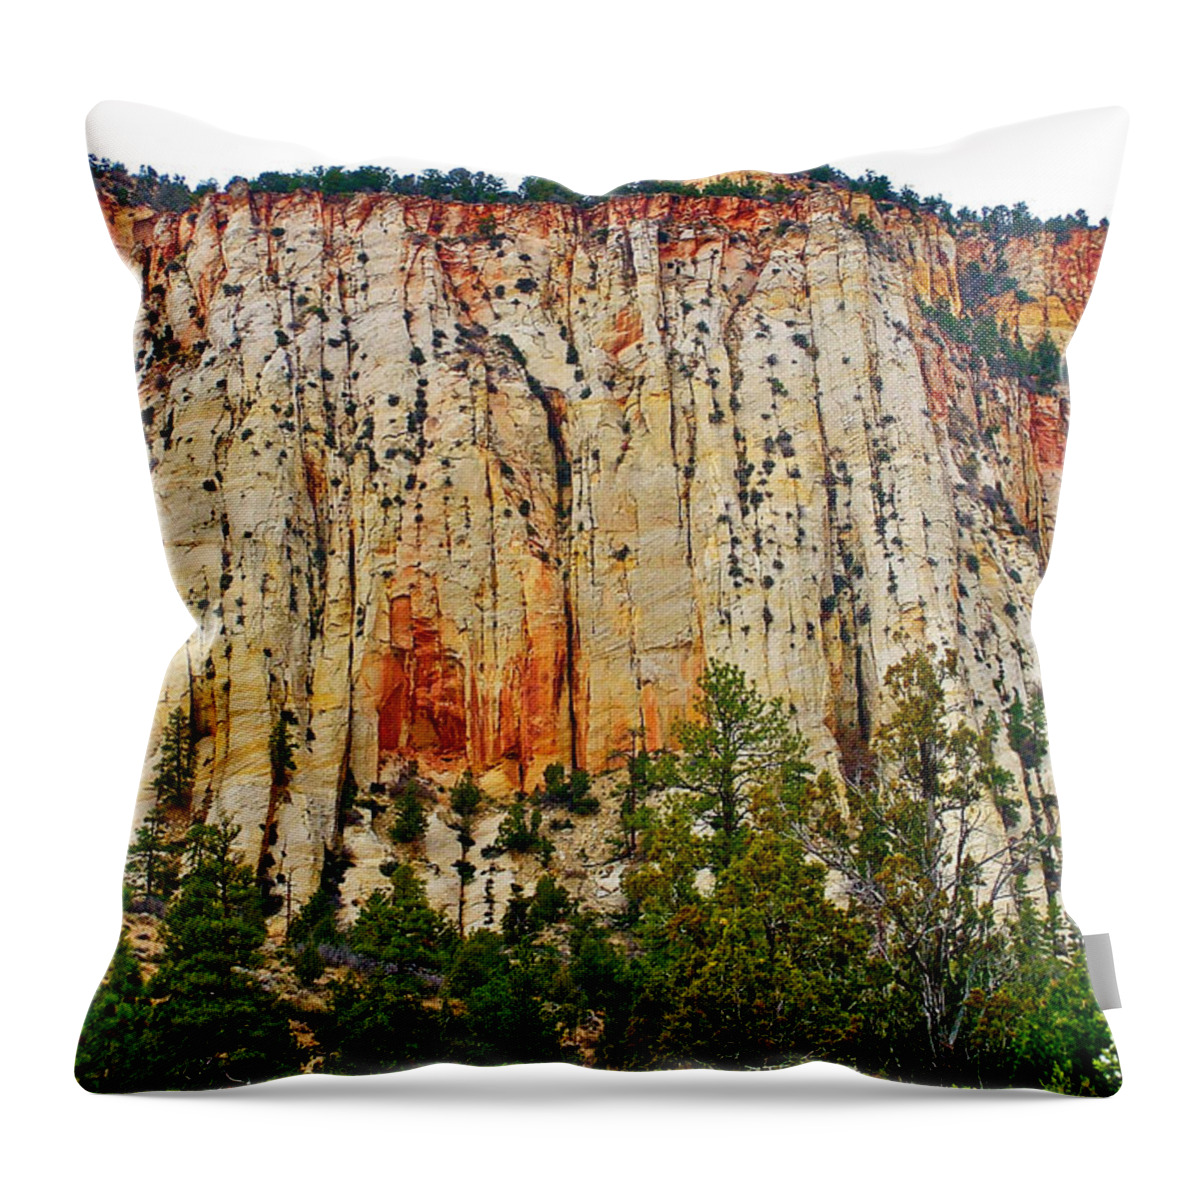 Cliffs Near Checkerboard Mesa Along Zion-mount Carmel Highway In Zion National Park Throw Pillow featuring the photograph Cliffs near Checkerboard Mesa along Zion-Mount Carmel Highway in Zion National Park-Utah by Ruth Hager